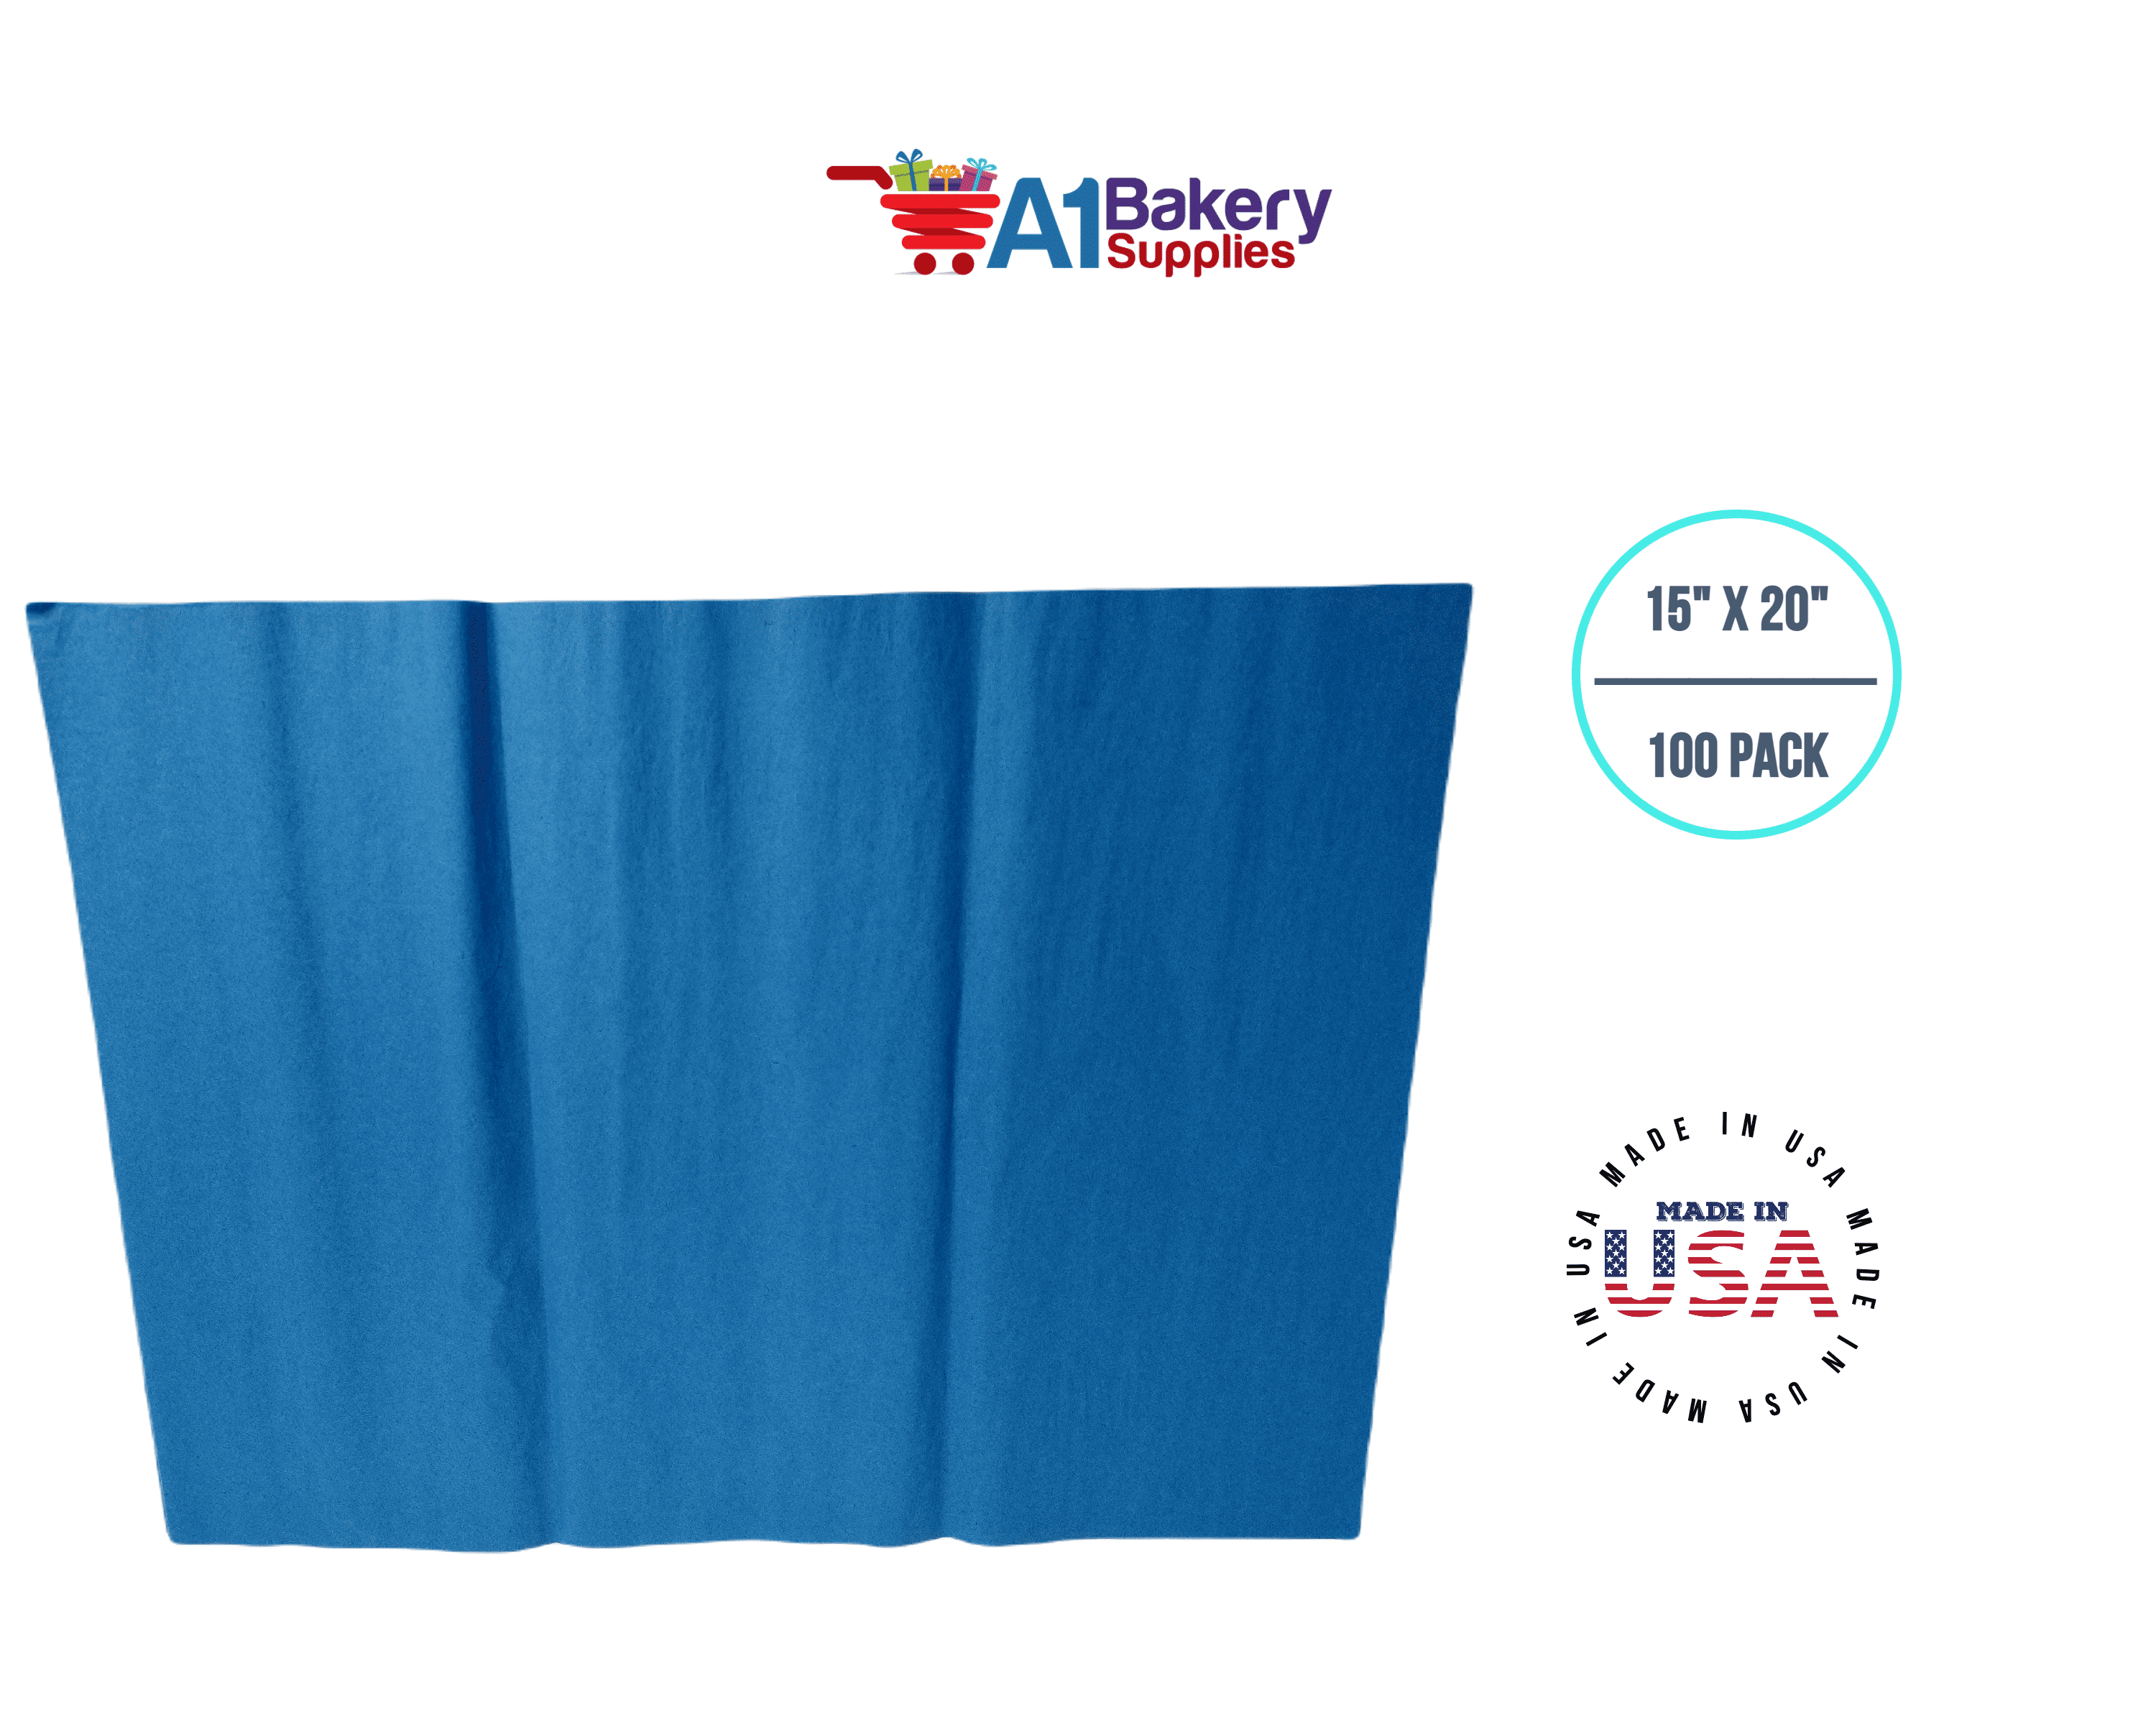 Acid Free Kraft Tissue Paper 100 Sheets 15 Inch x 20 Inch Ph Neutral  Premium Tissue Paper A1 bakery supplies Made in USA